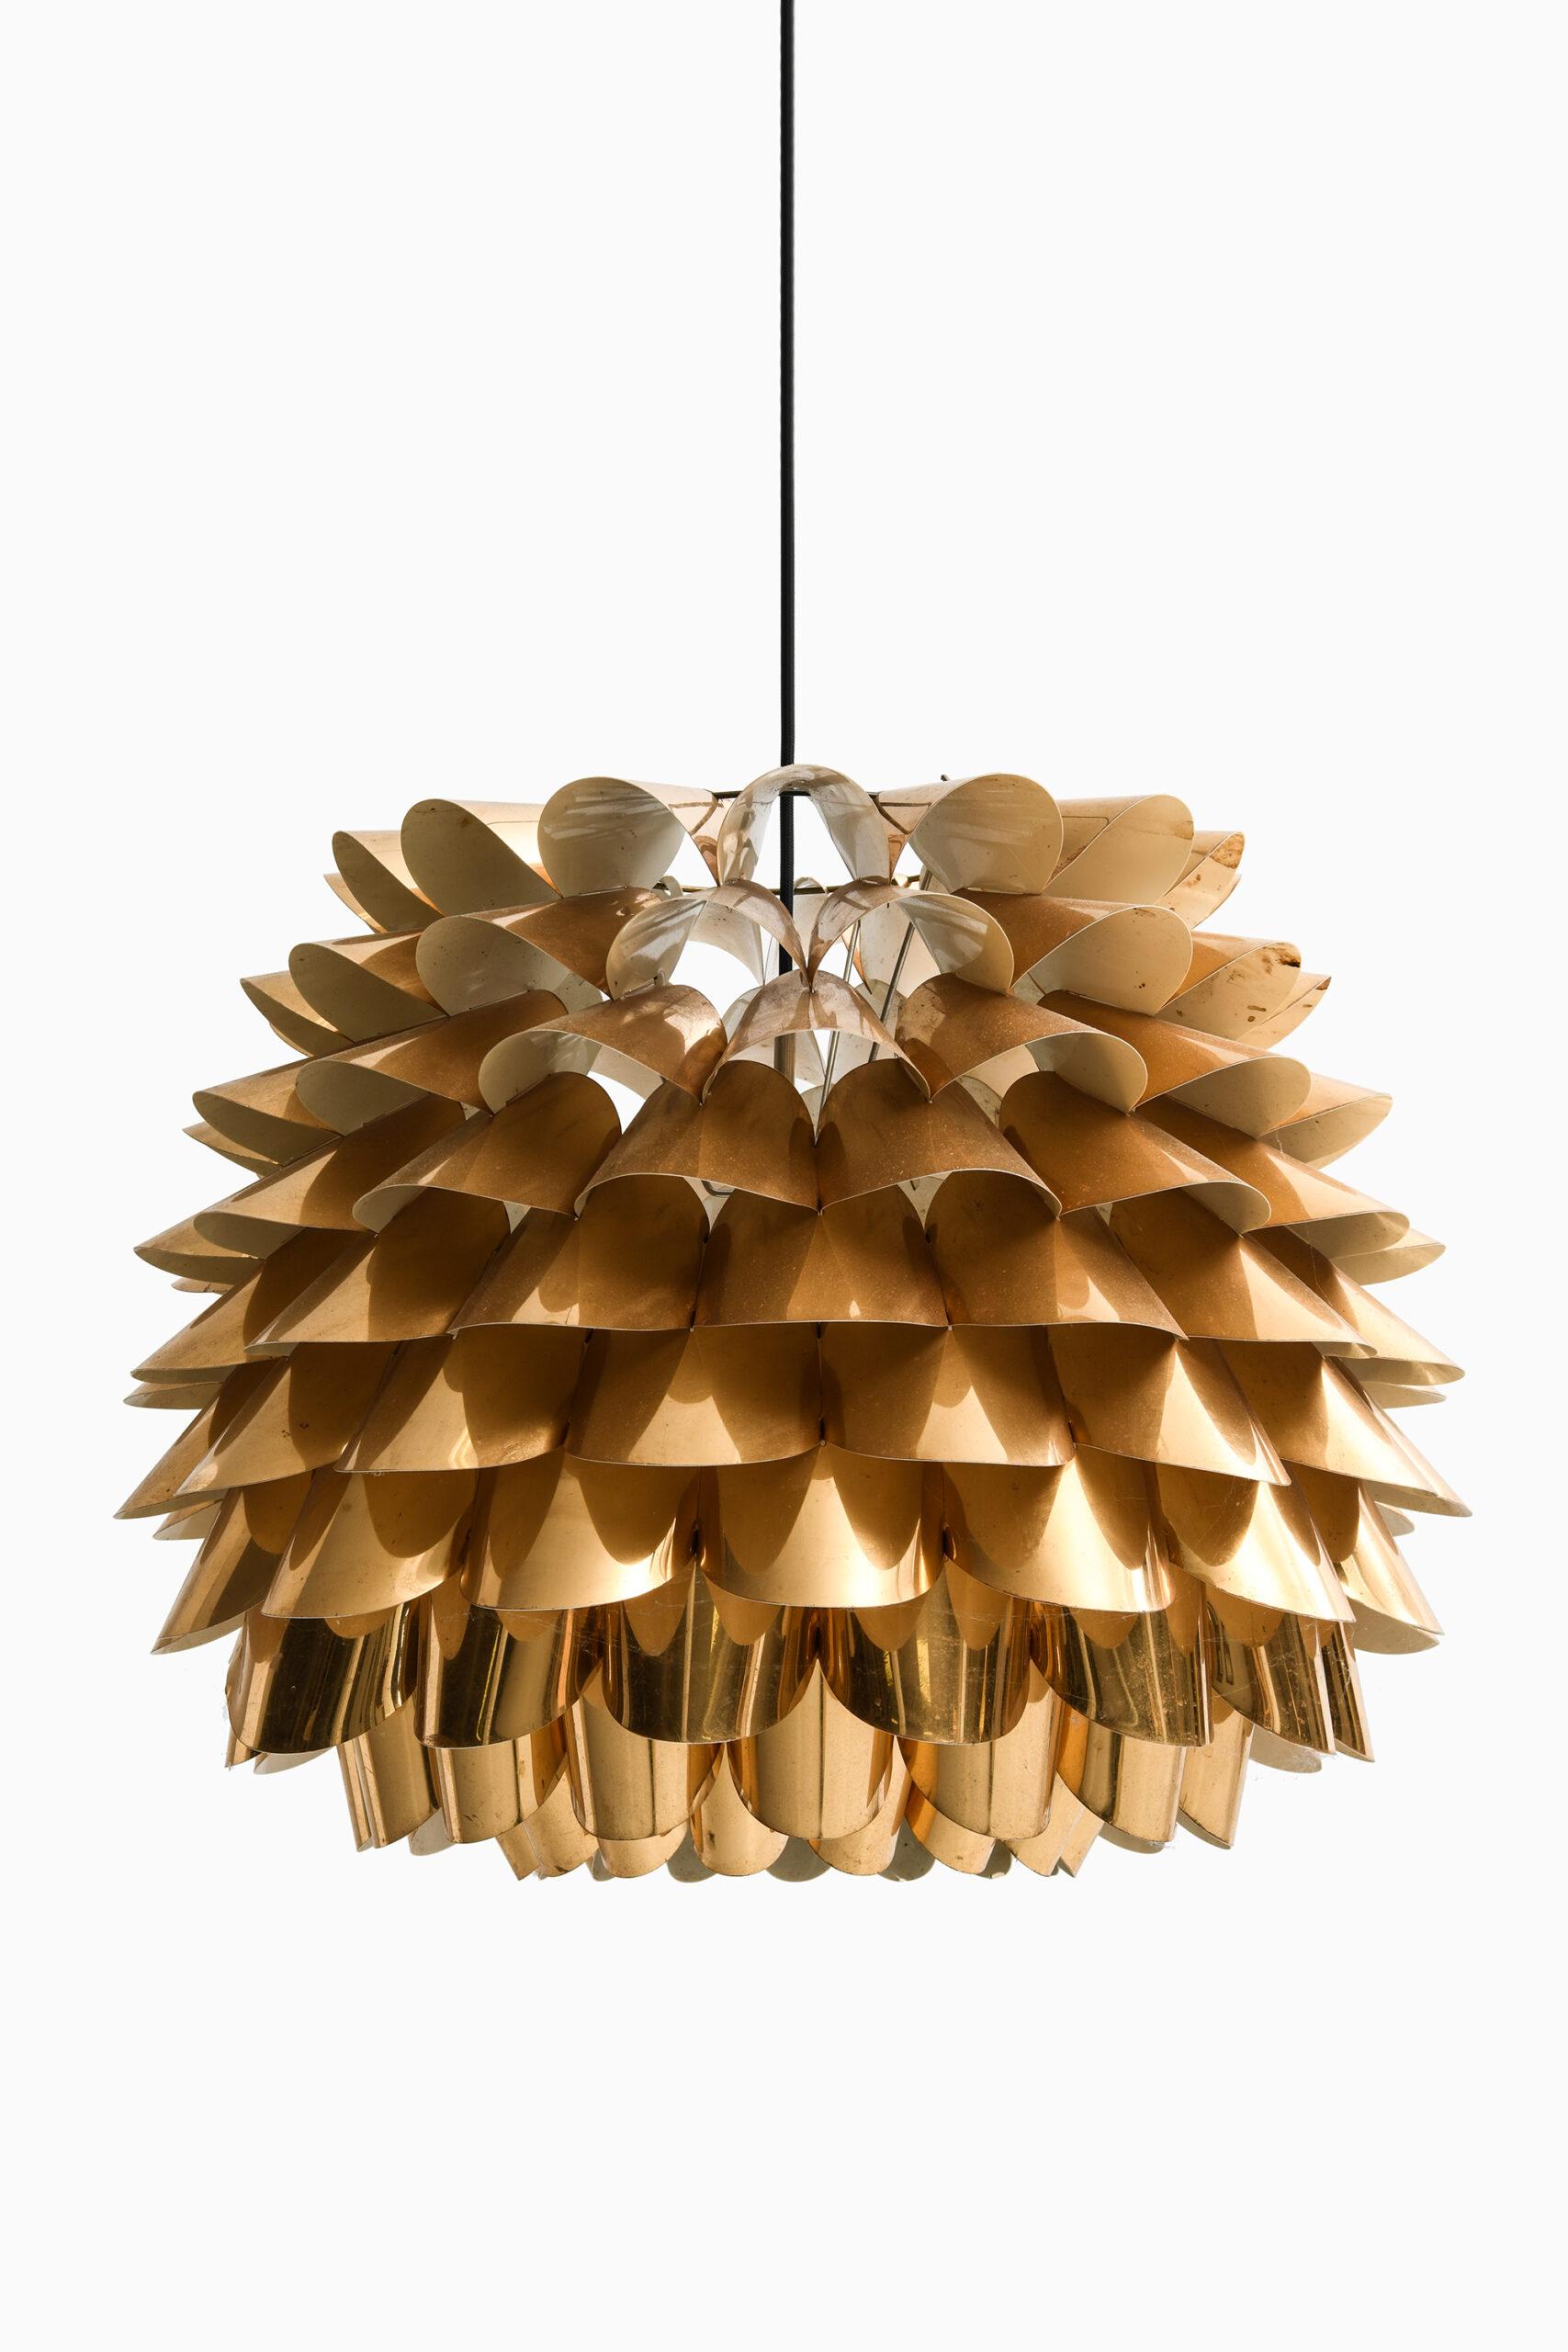 Rare ceiling lamp by unknown designer. Probably produced in Denmark.